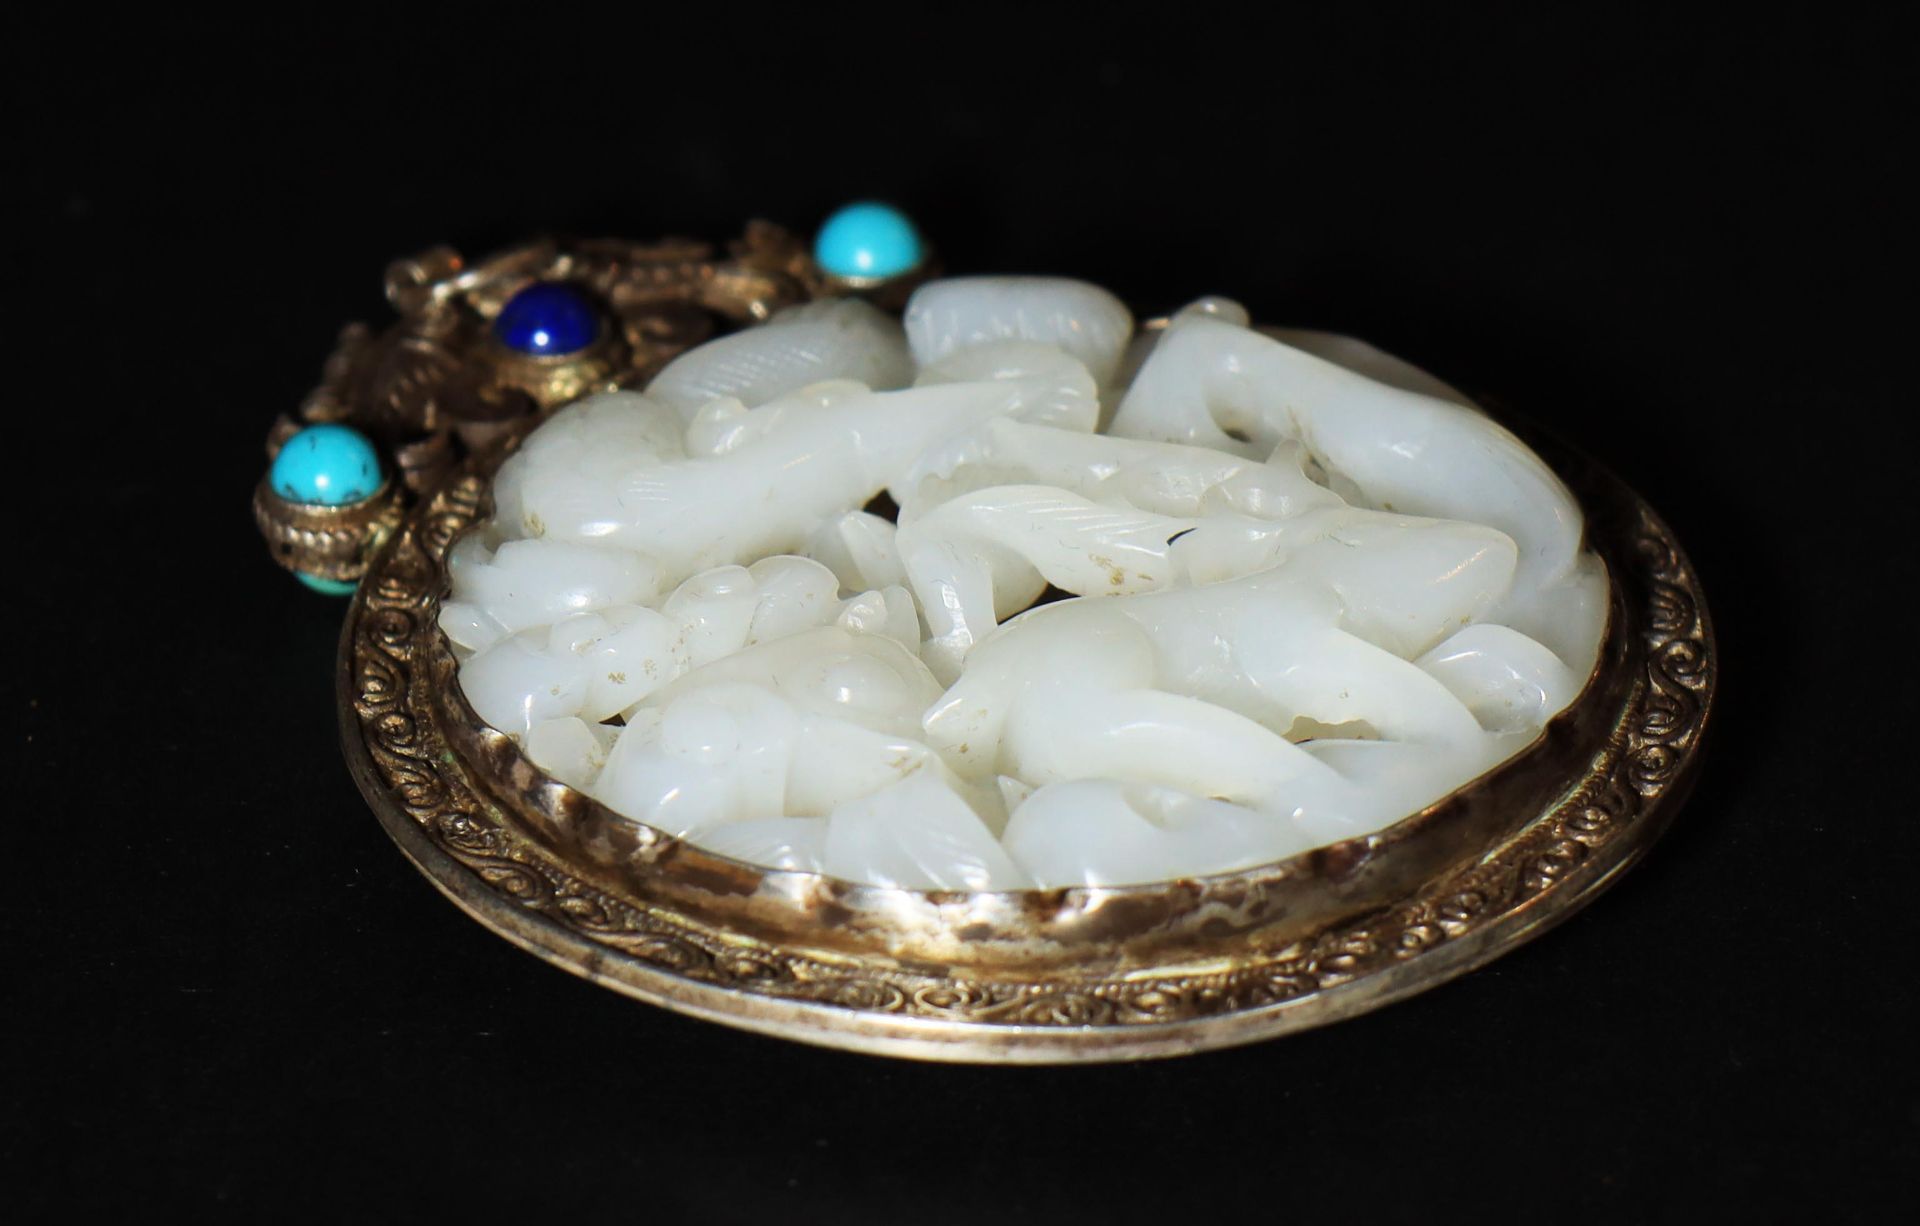 A silver-wrapped jade pendant from the Qing Dynasty - Image 4 of 6